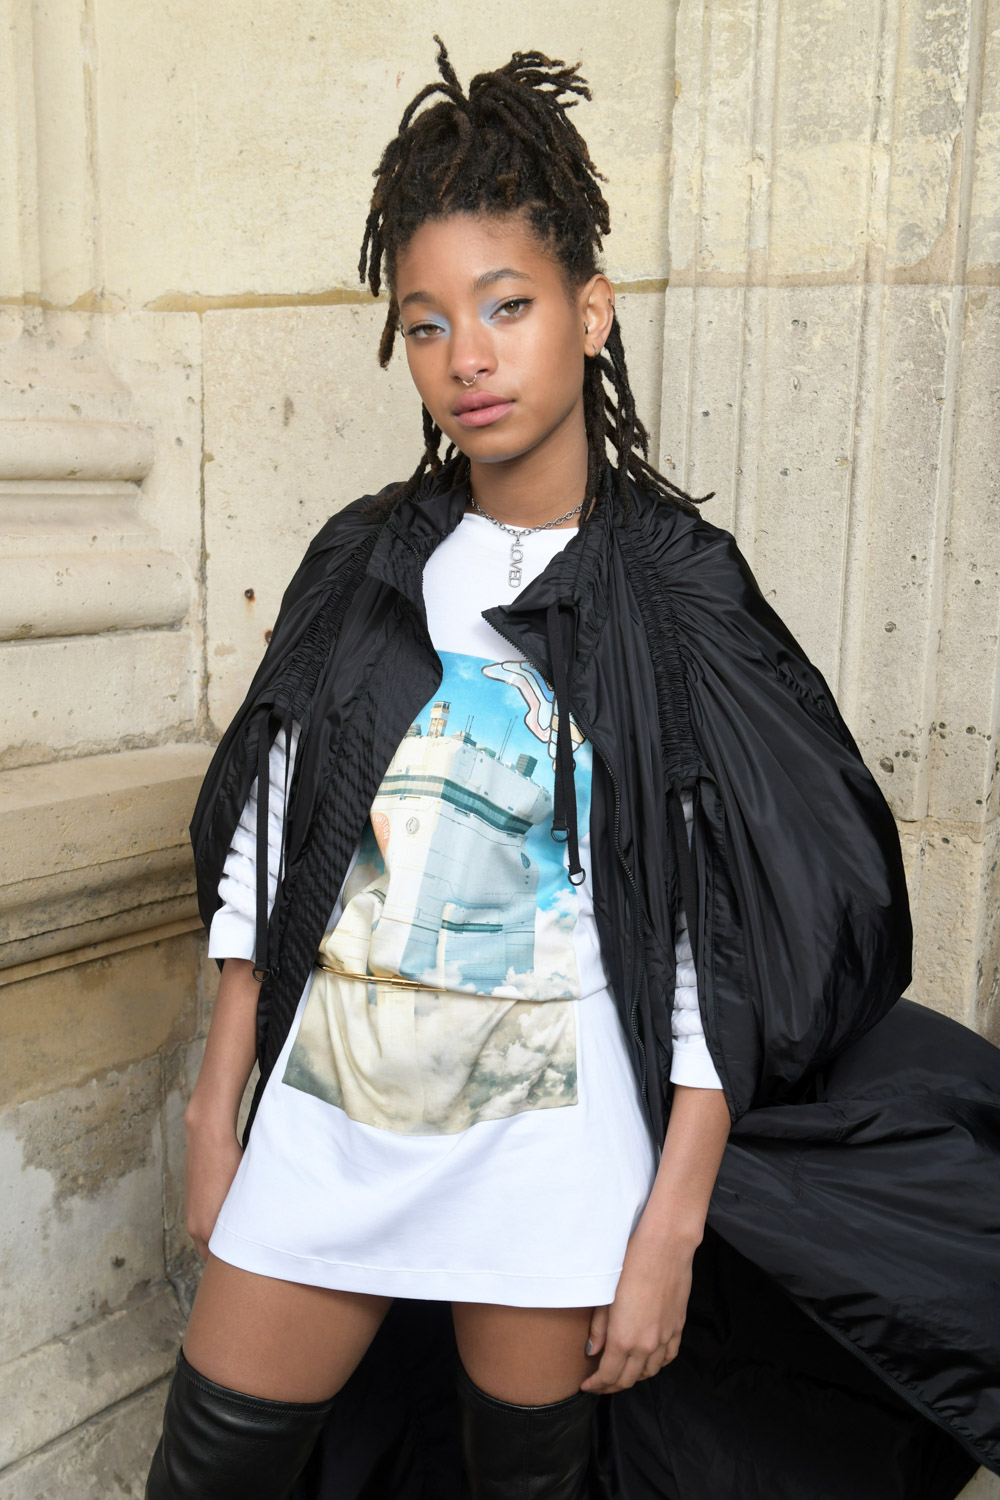 Willow Smith rocks a tiny black crop top with a sleeveless jacket